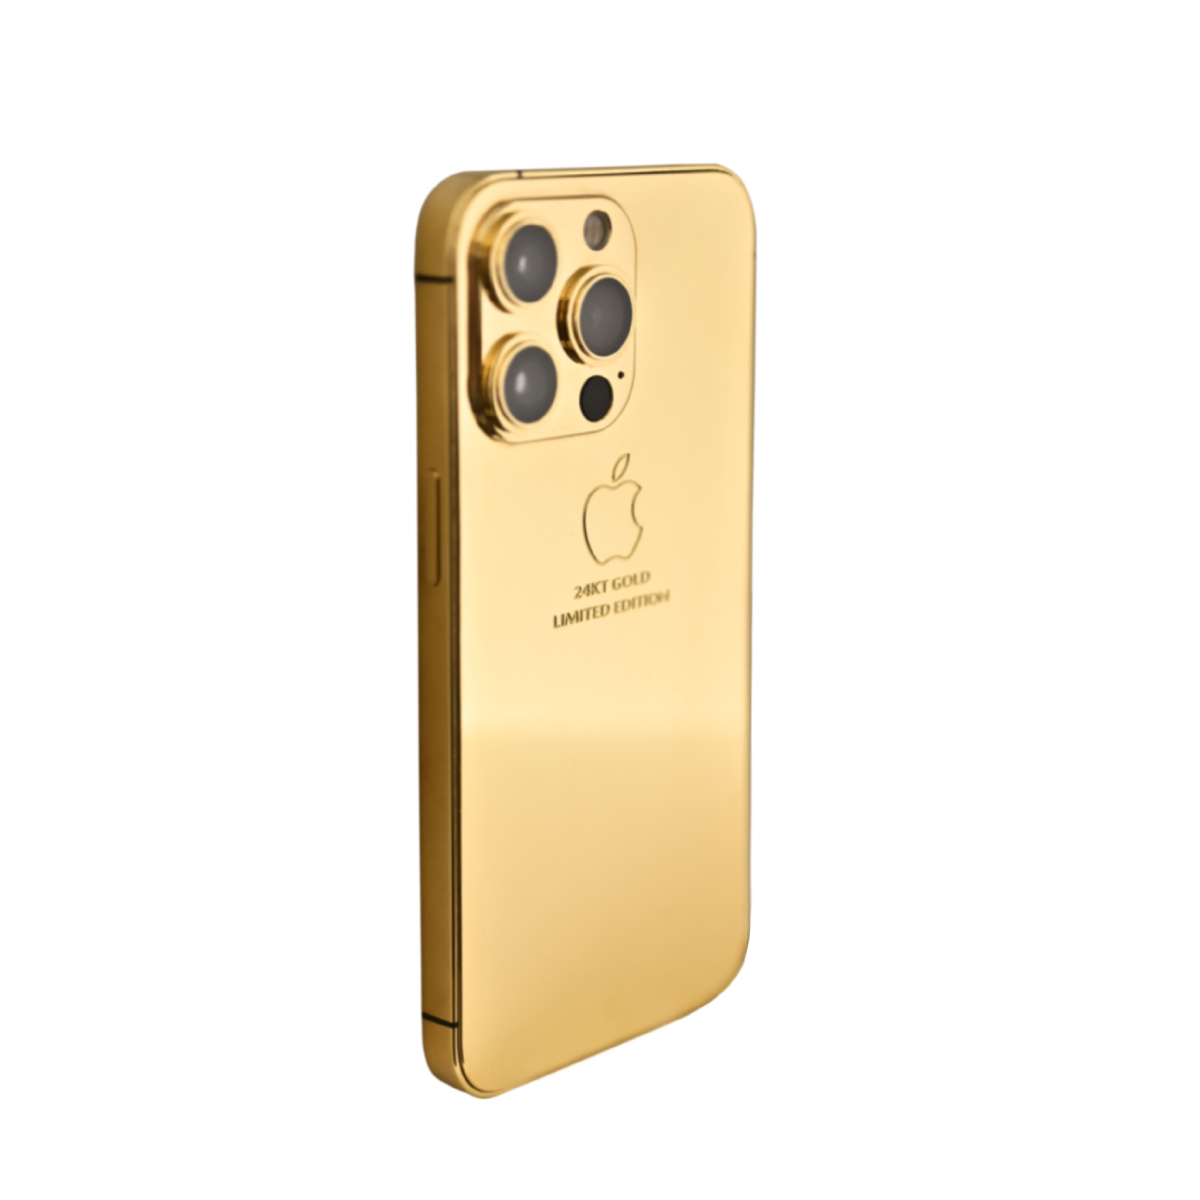 Caviar Luxury 24k Full Gold Customized iPhone 13 Pro 1 TB Limited Edition